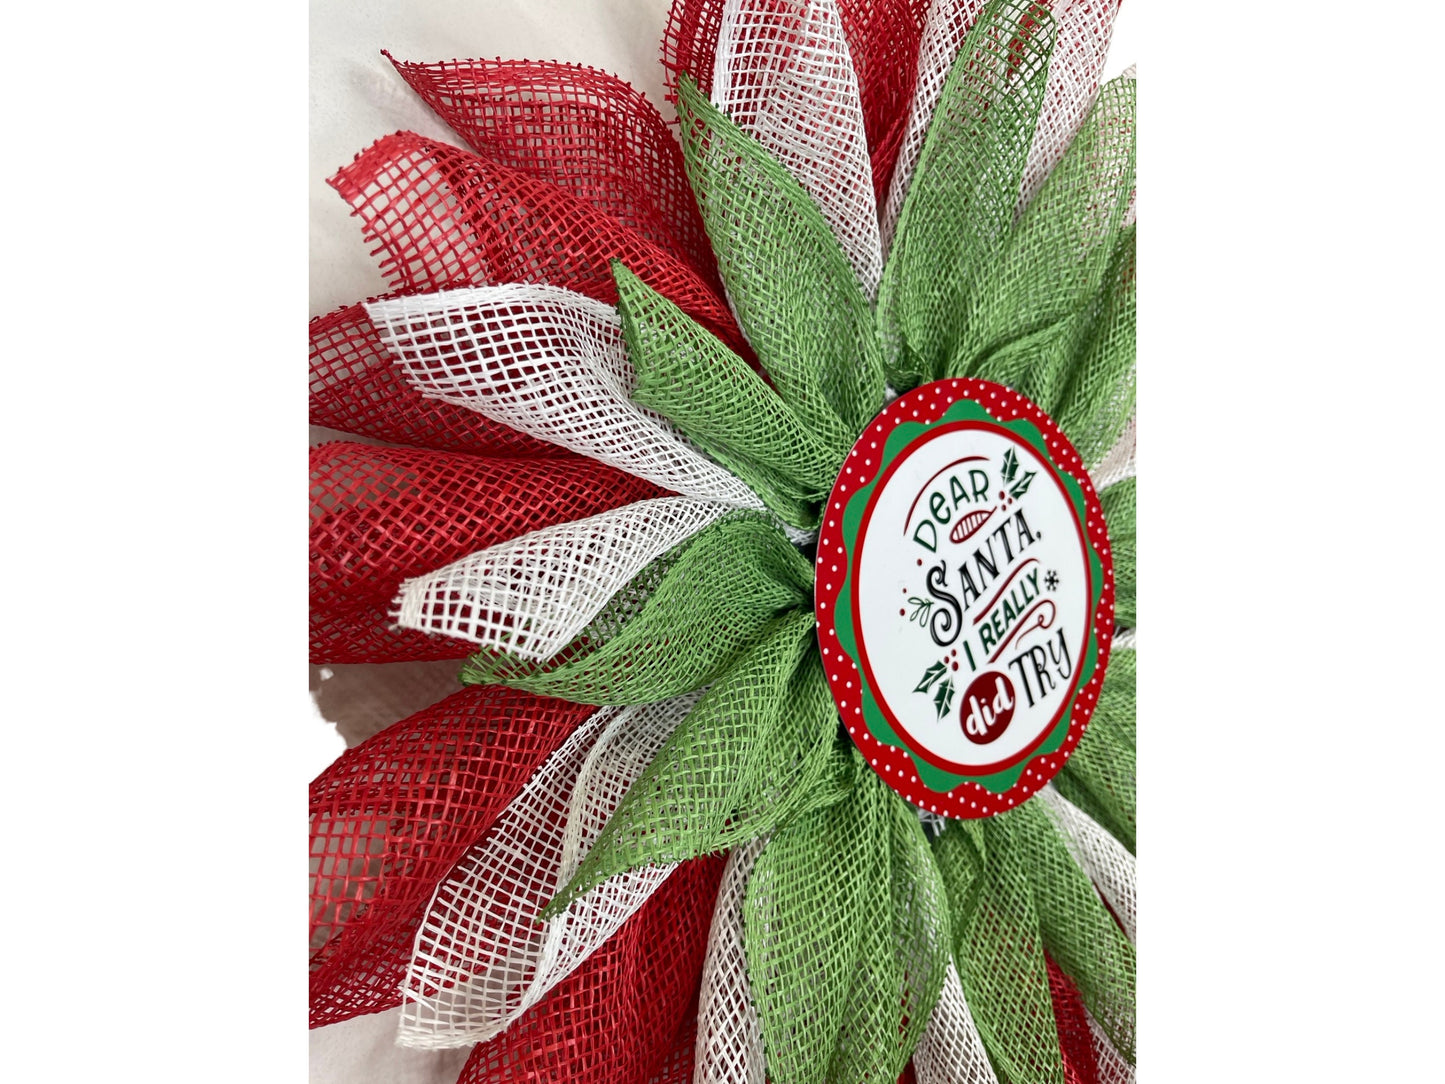 flat, red, white and green flat Christmas flower wreath, Christmas wreath for screen door, flower wreath for screen door